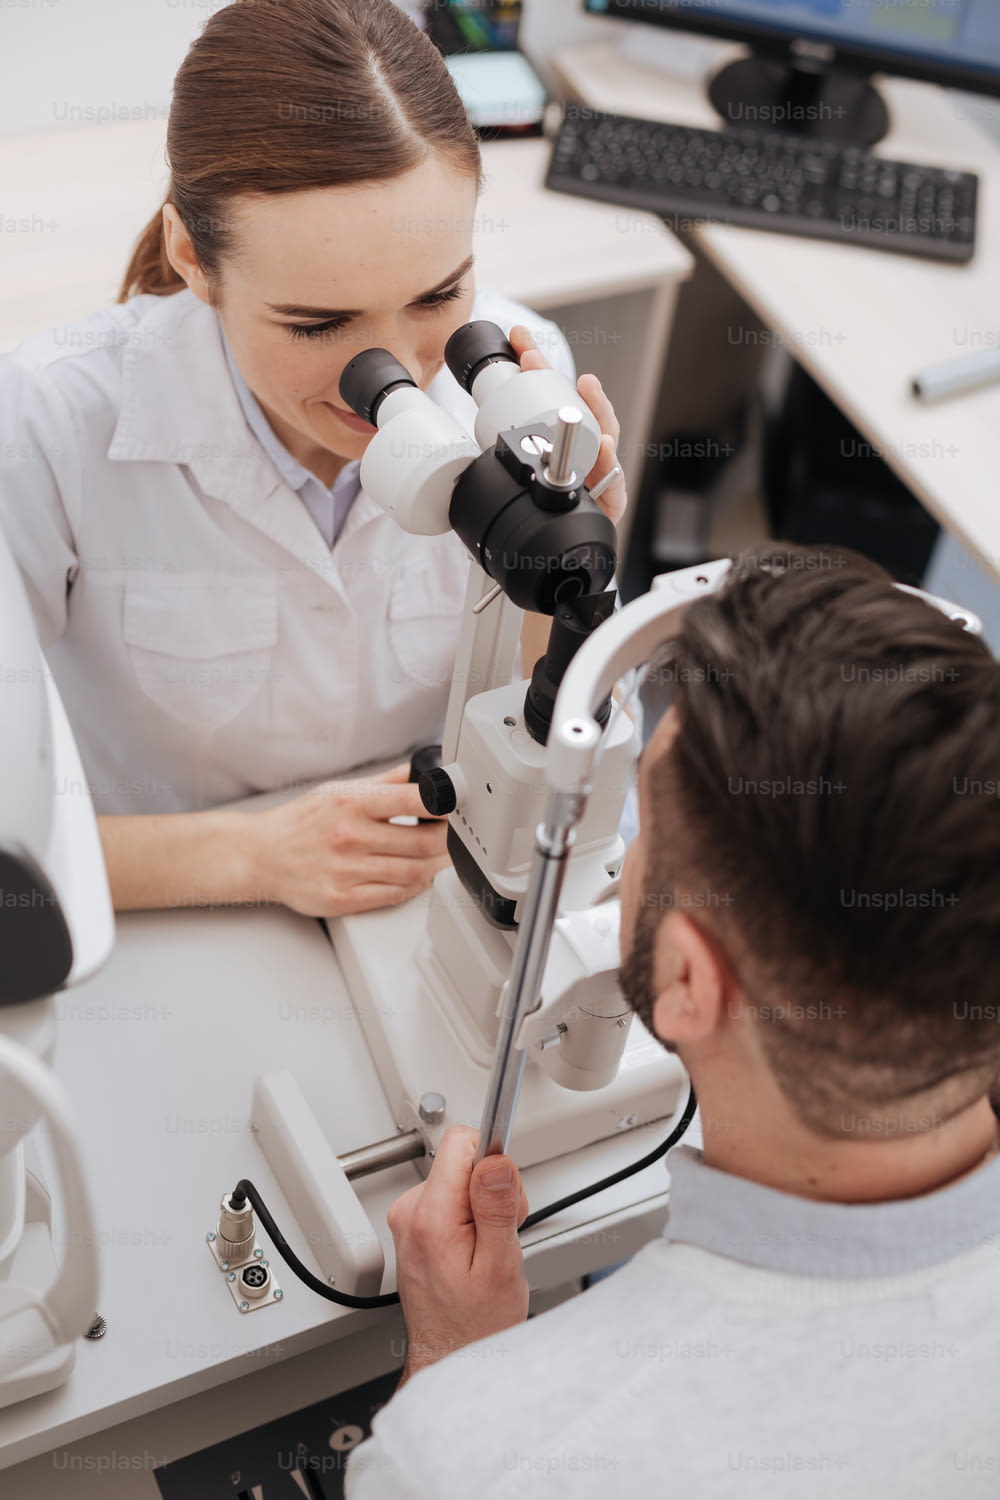 Ophthalmological examination. Top view of a nice professional female optician sitting opposite her patient and examining his eyes while using medical equipment